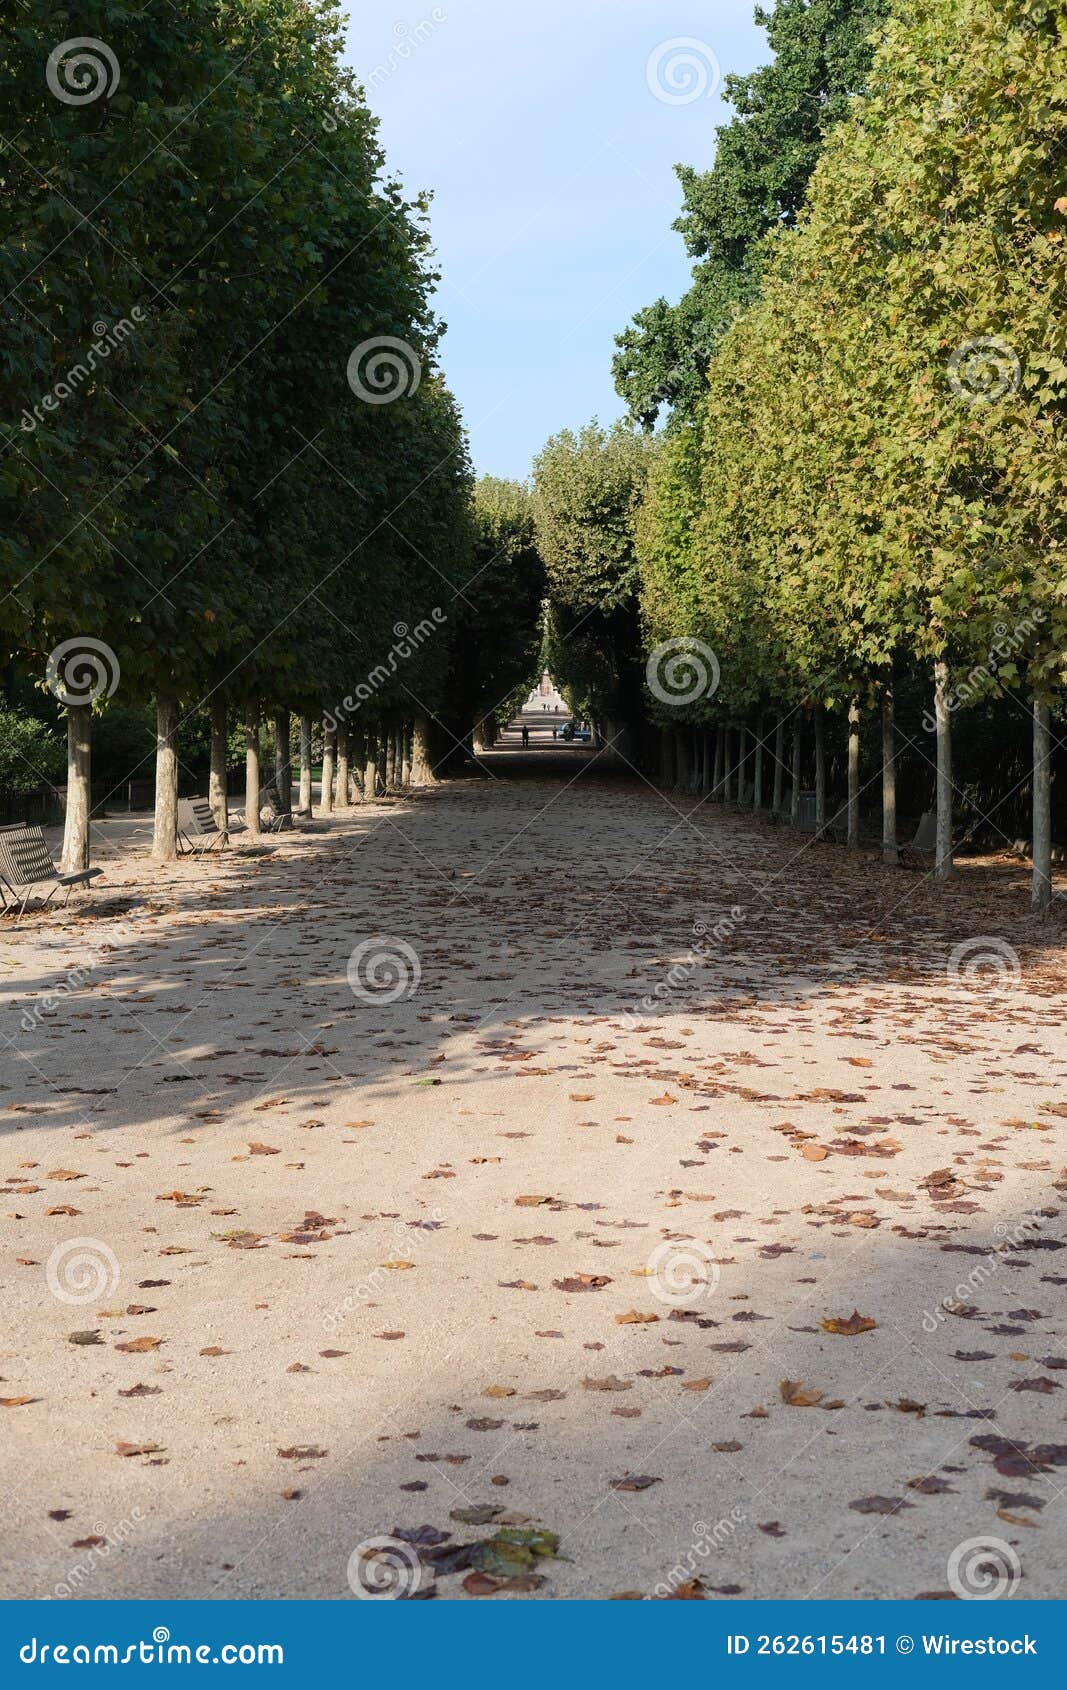 vertical shot of a footpath passing through trees in the garden of plants in paris